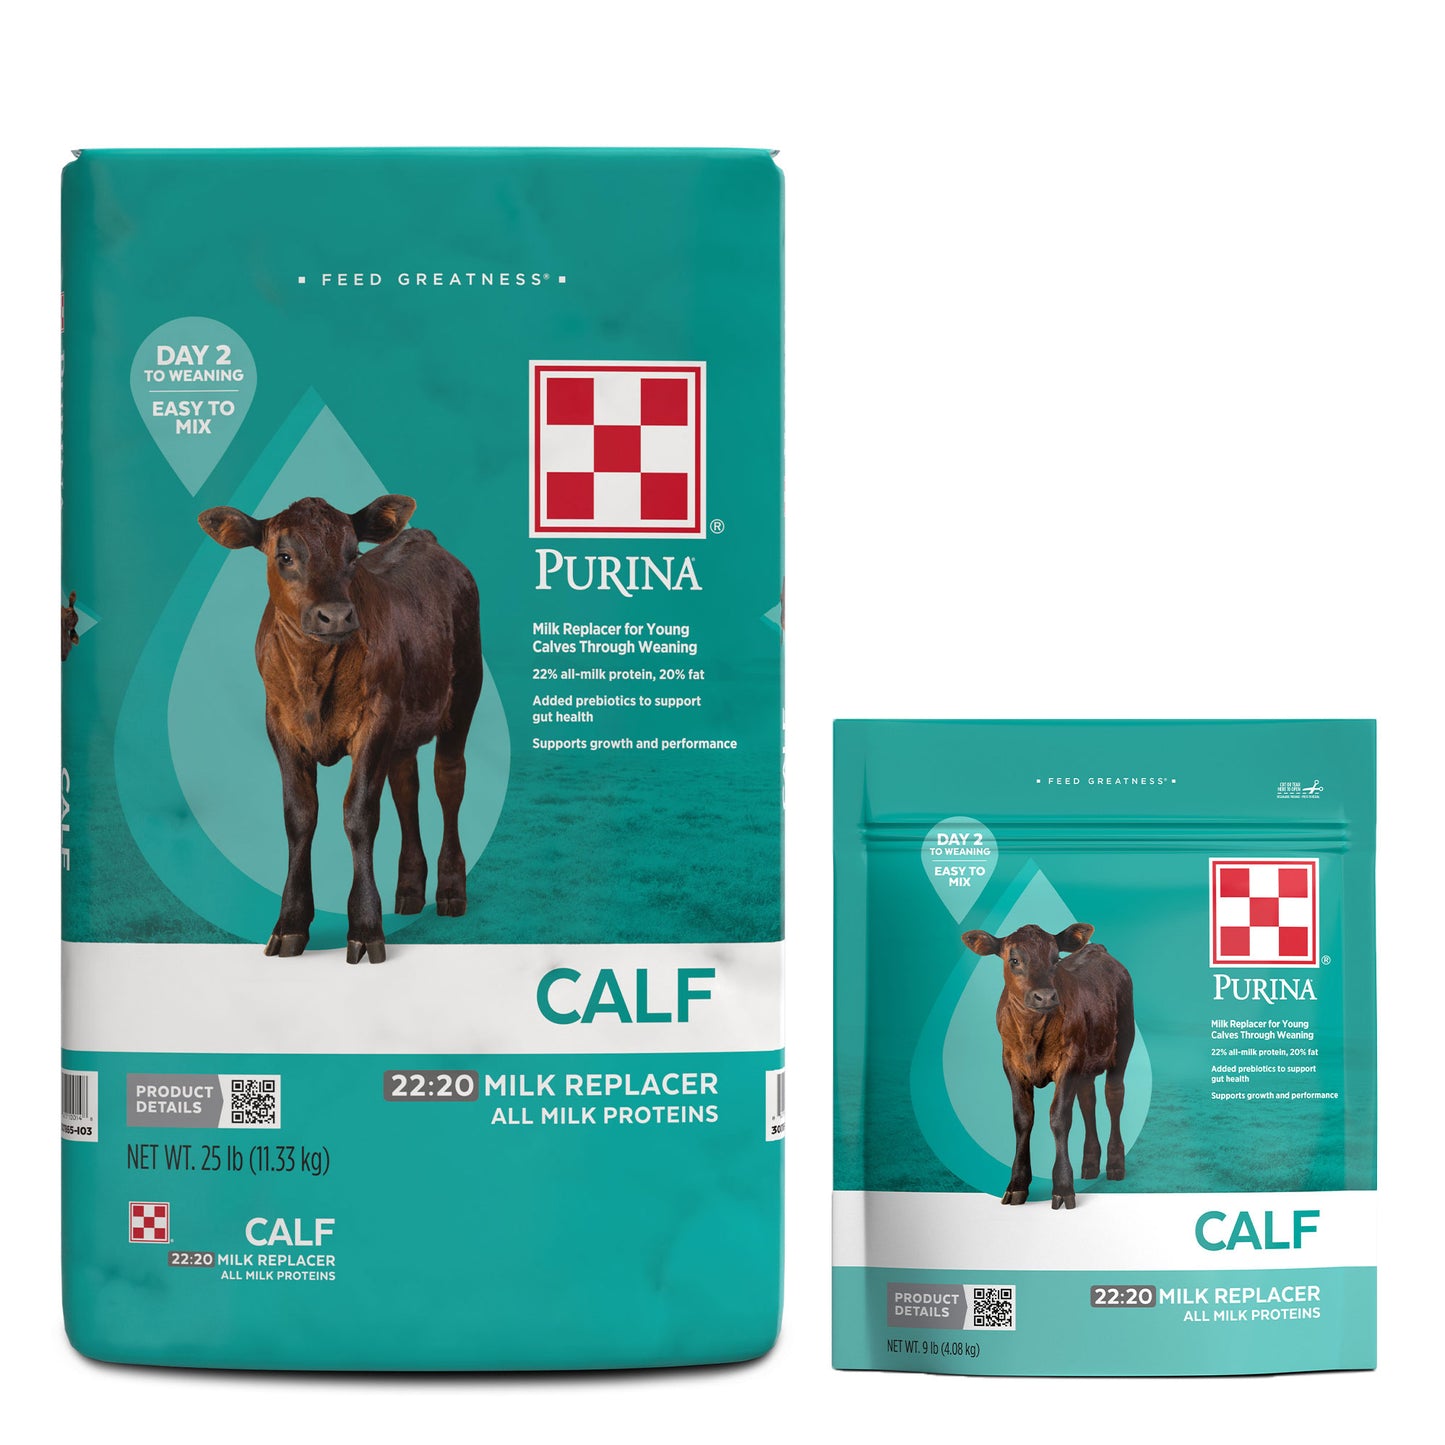 Purina Calf Milk Replacer 22-20 25 Pound and 9 LB grouped together